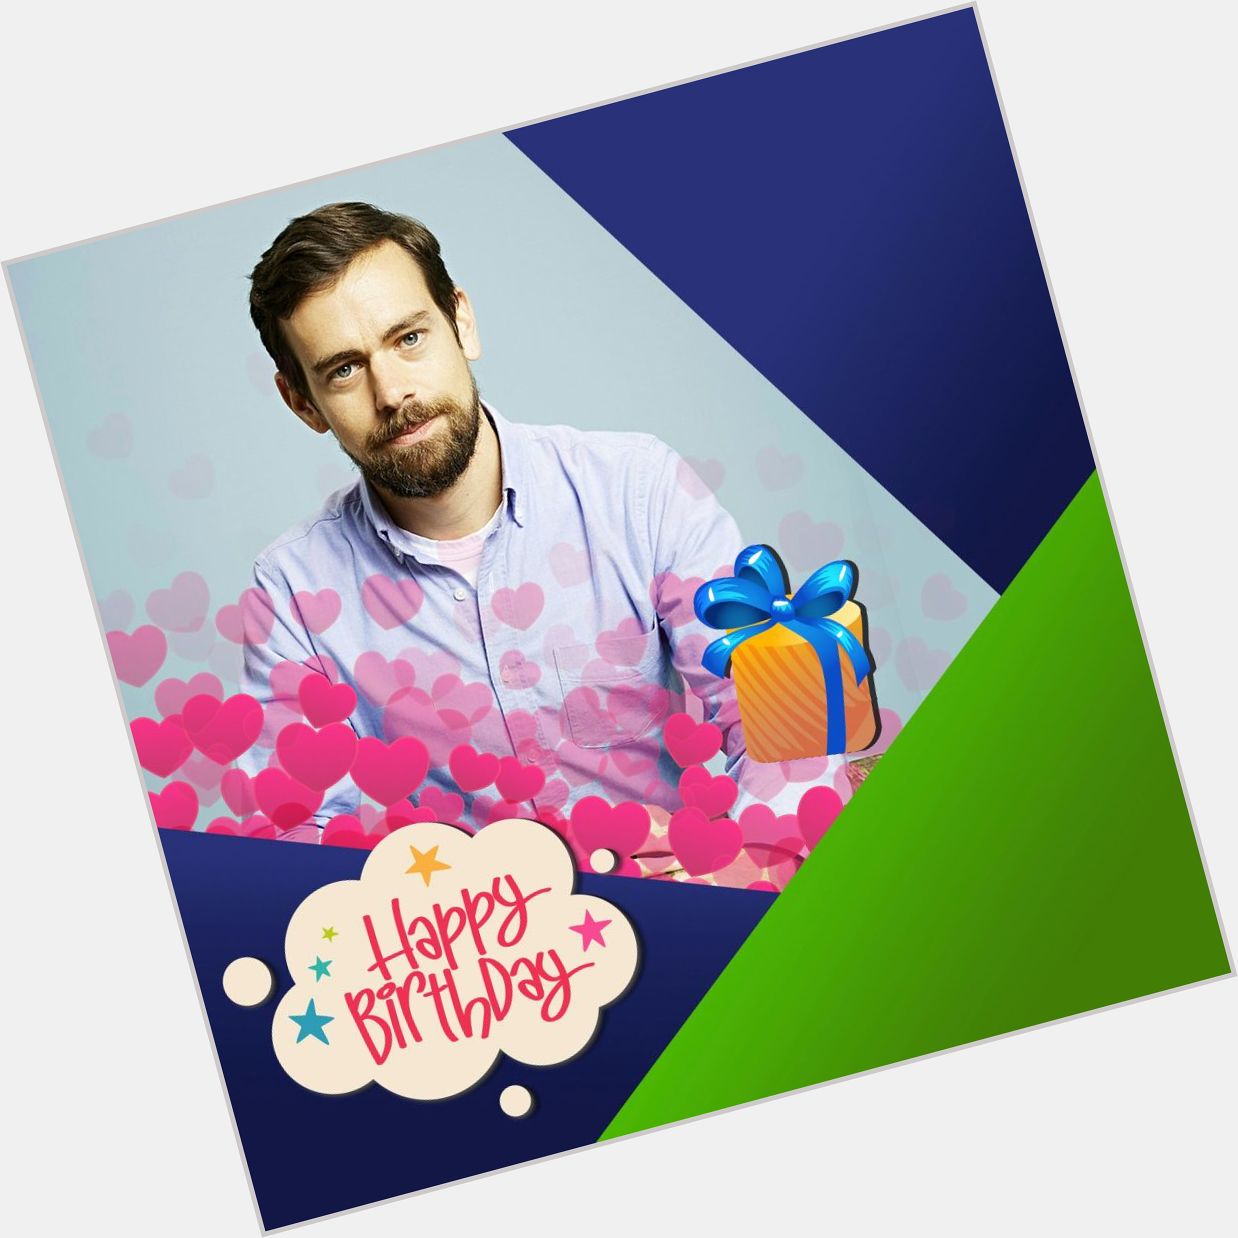 A very Happy Birthday, Jack Dorsey!
Wishing you many more messages in the years to come. 